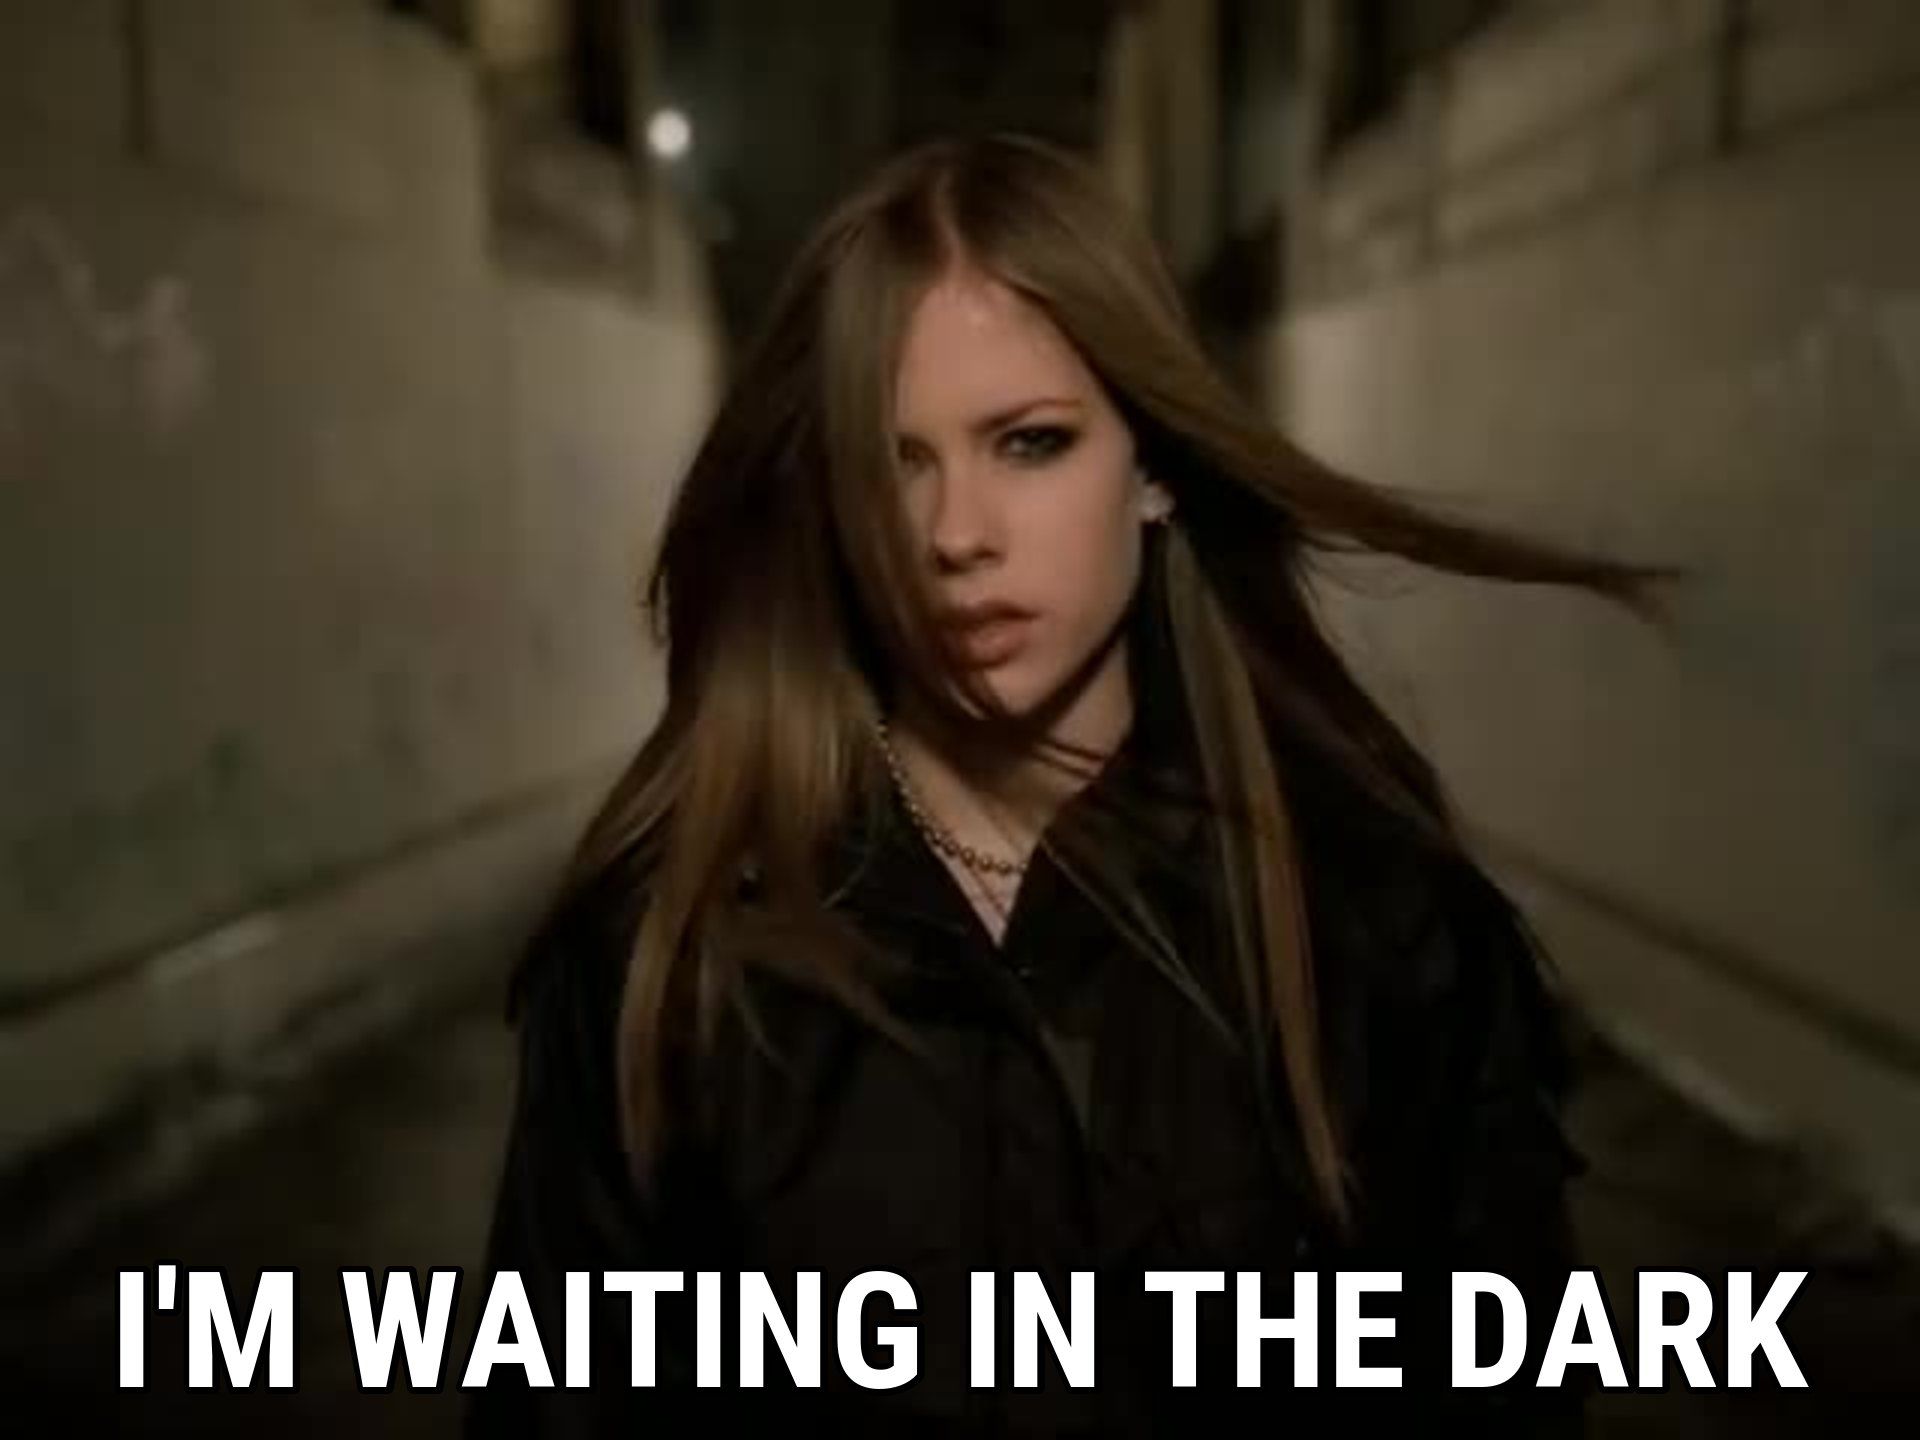 I'm with You lyrics Avril Lavigne song in image